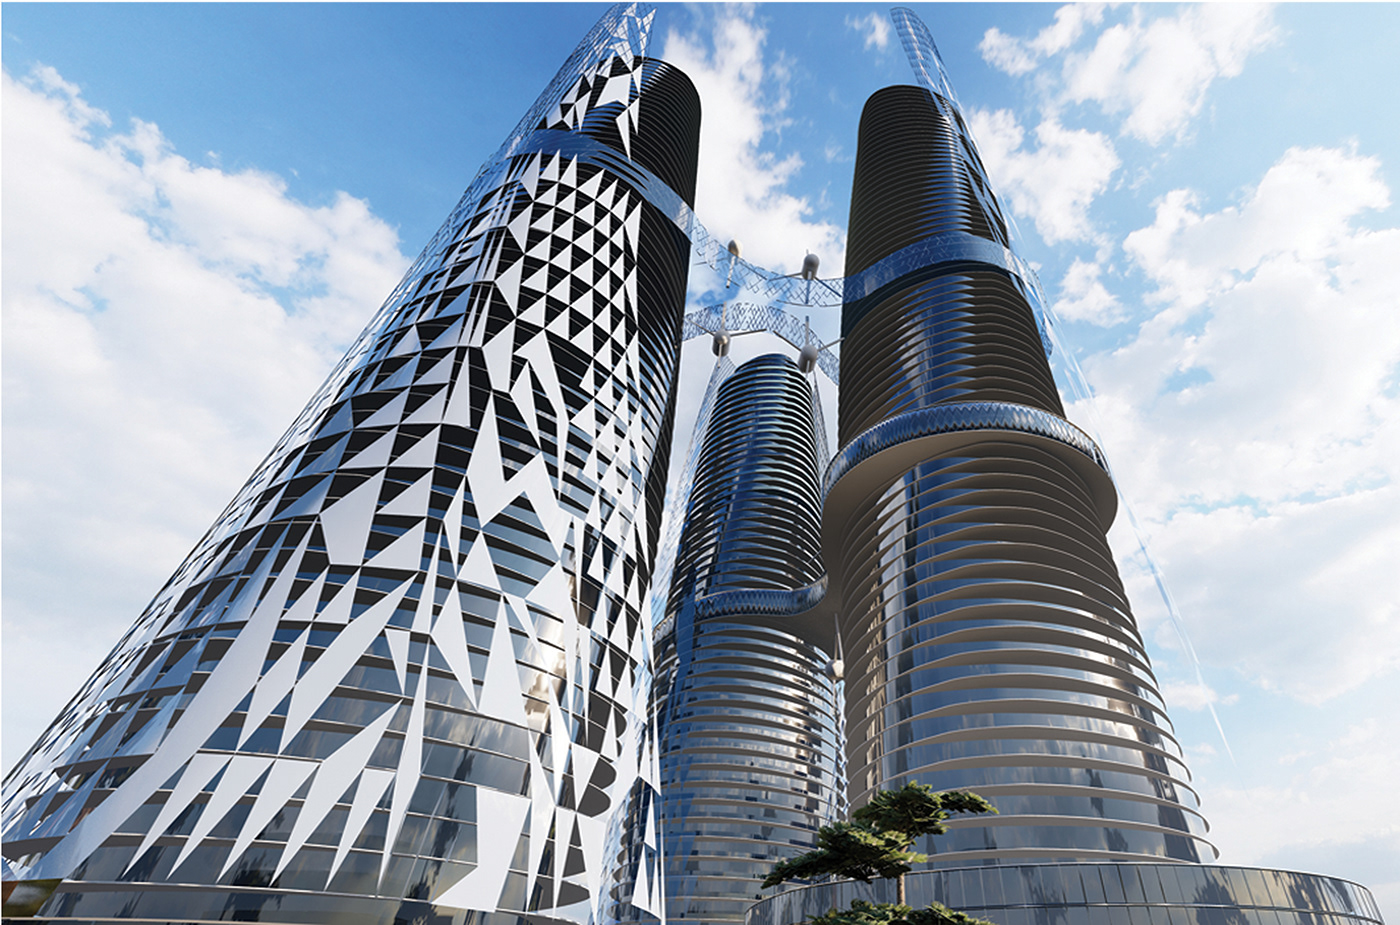 3ds max alalamein architecture exterior graduation Lumion Render Render skyscapes skyscraper towers